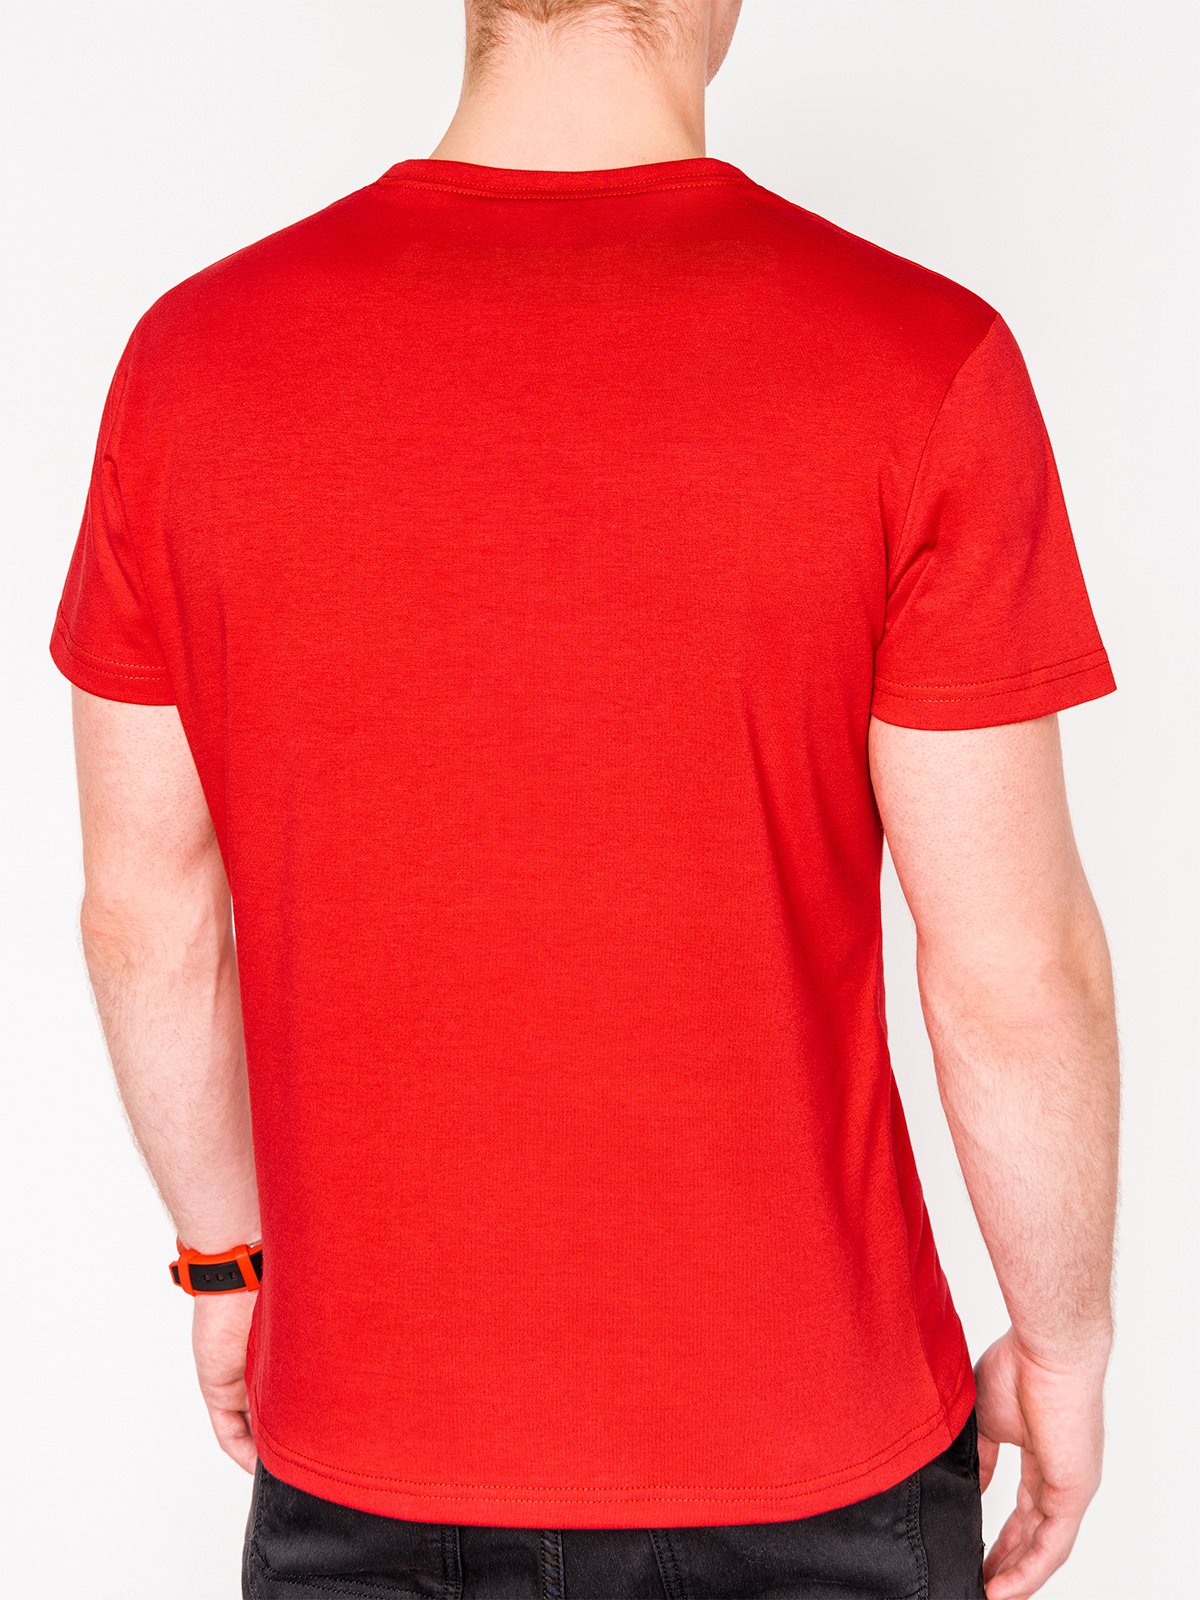 Men's printed t-shirt S1080 - red | MODONE wholesale - Clothing For Men